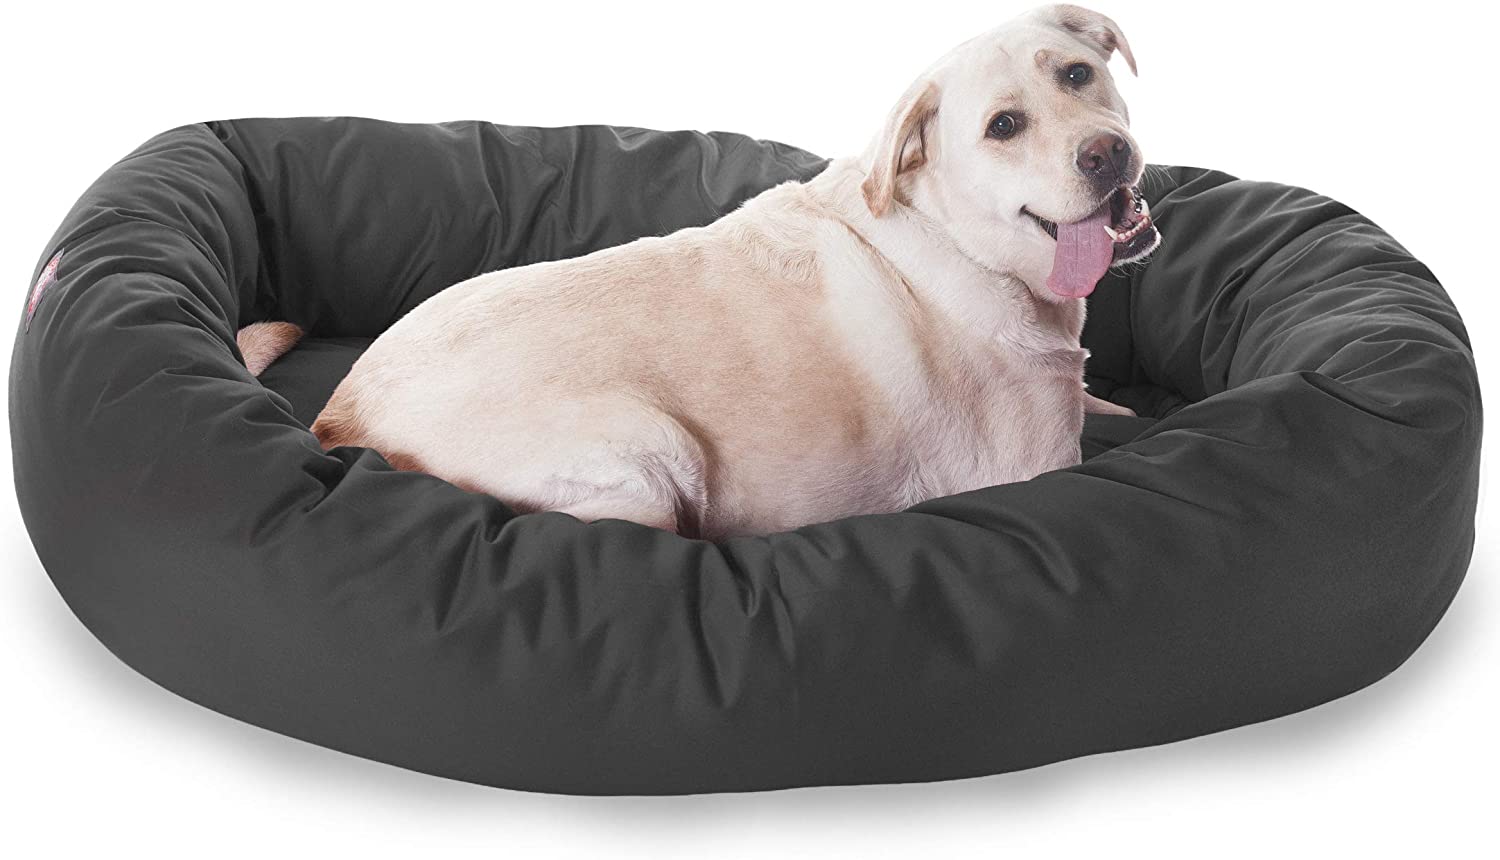 Majestic Pet Poly-Cotton Bagel Dog Bed